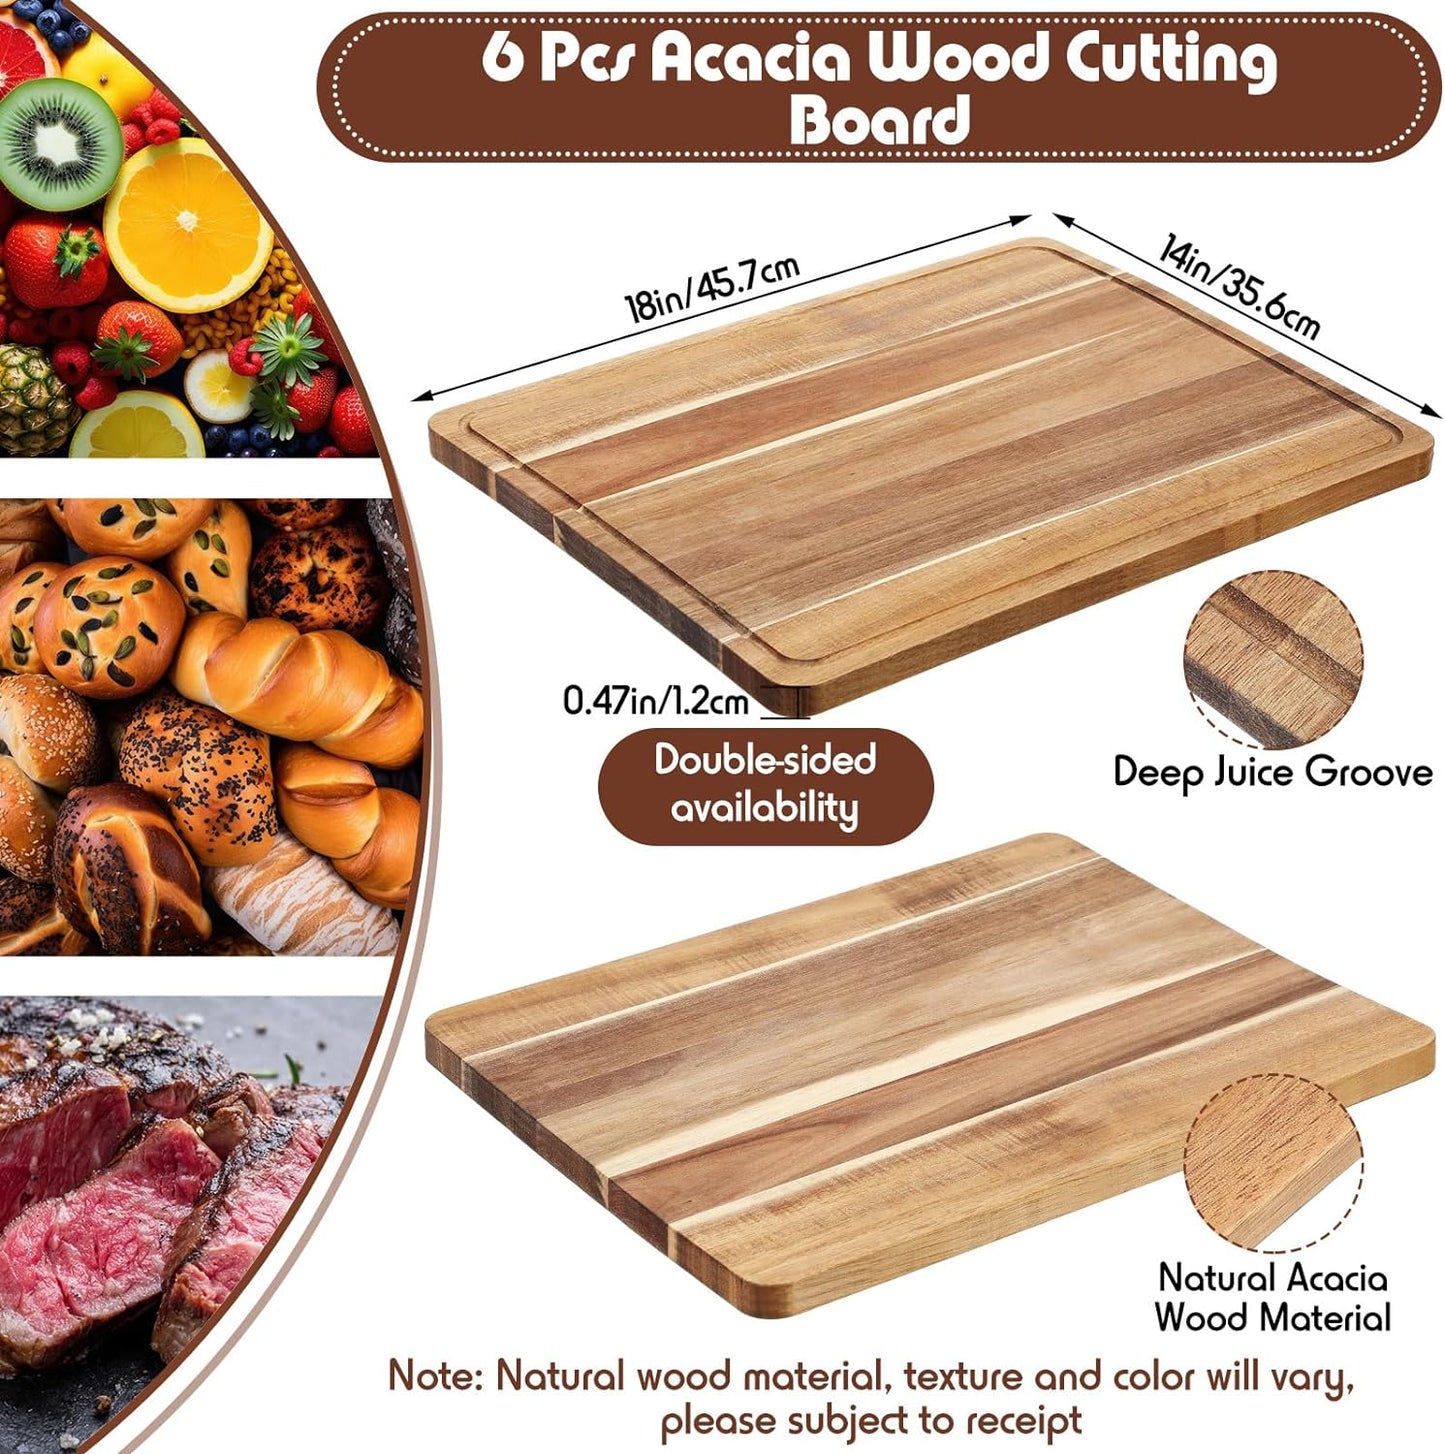 Customized Engraved Cutting Board (18in x 14in)